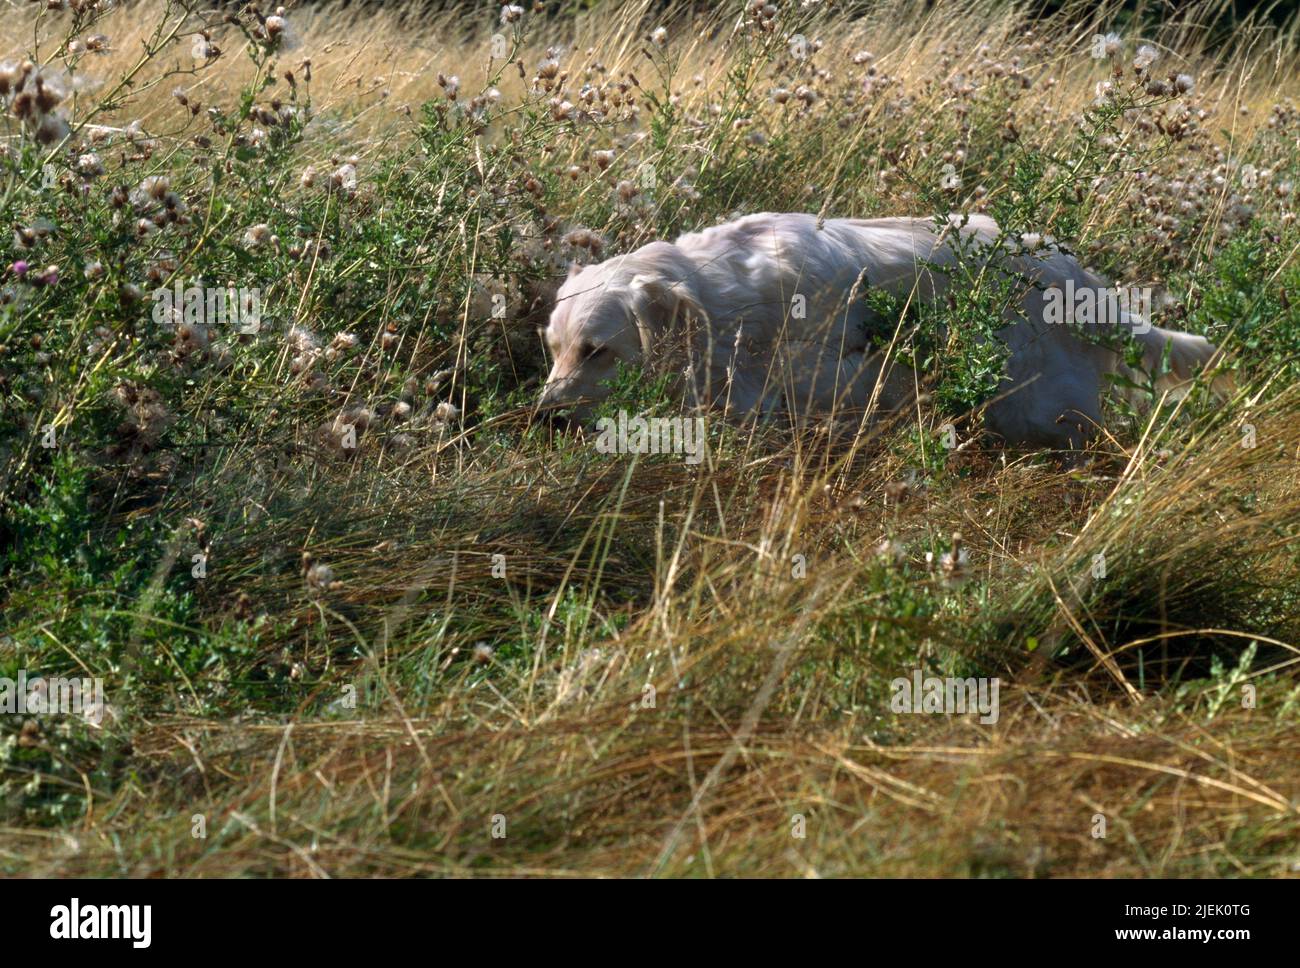 Golden Retriever Searching For Animals In Long Grass Surrey Englandd Stock Photo